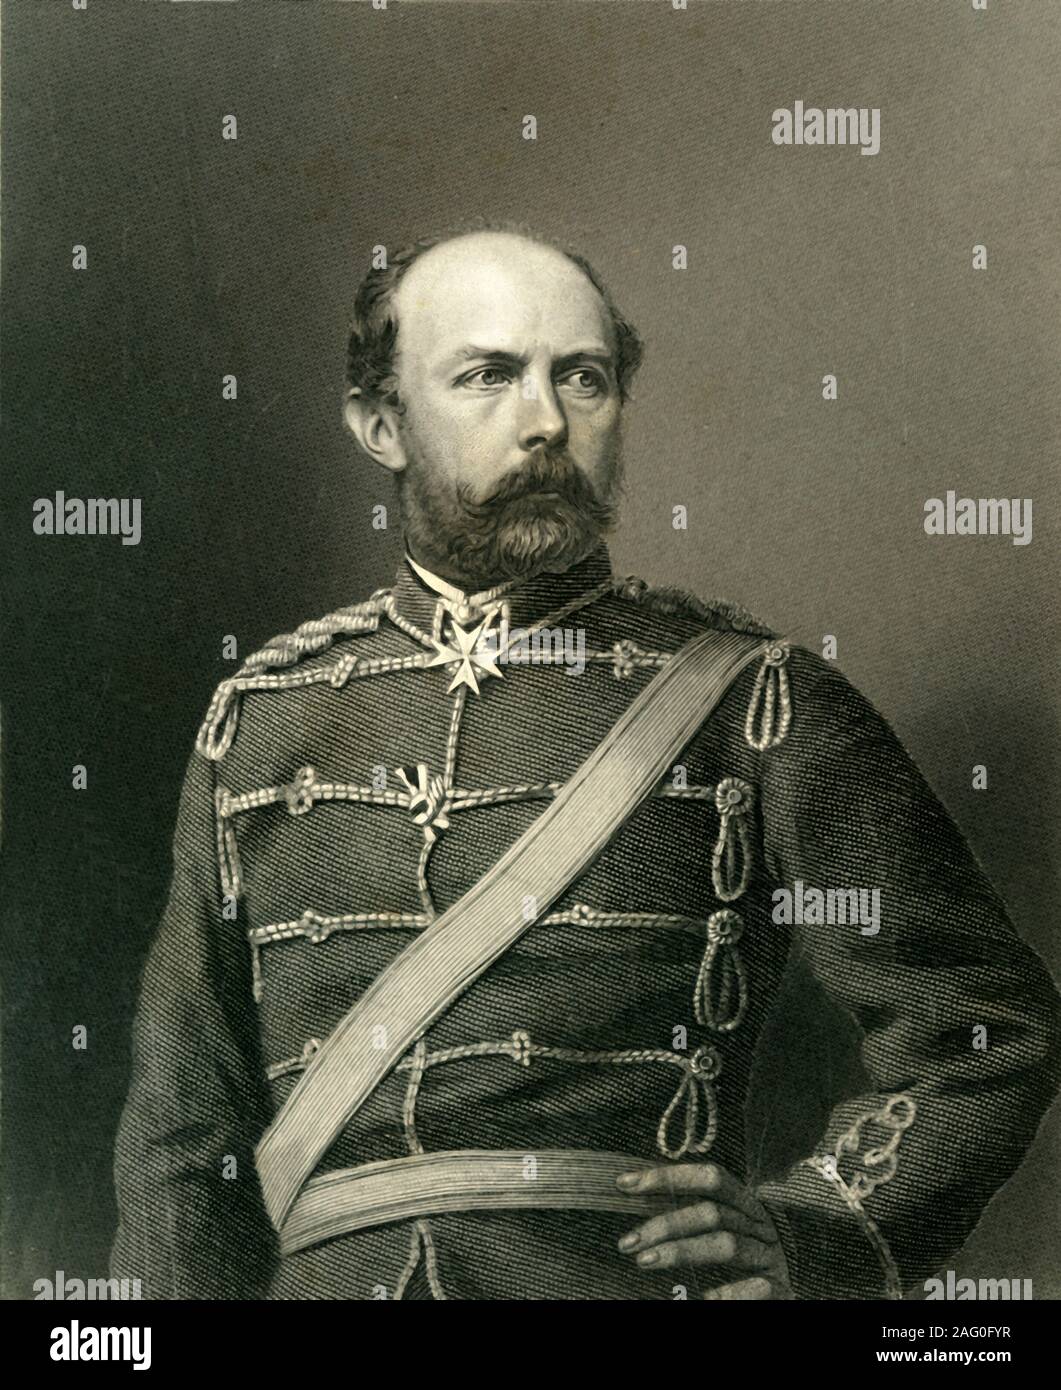 'Prince Frederick Charles', c1872. Portrait of Prince Frederick Charles of Hesse-Kassel (1868-1940), Prussian field marshal who married Princess Margarete of Prussia, granddaughter of Queen Victoria. From &quot;The Franco-Prussian War: its causes, incidents and consequences&quot;, Volume I, by Captain H M Hozier. [William Mackenzie, London, 1872] Stock Photo